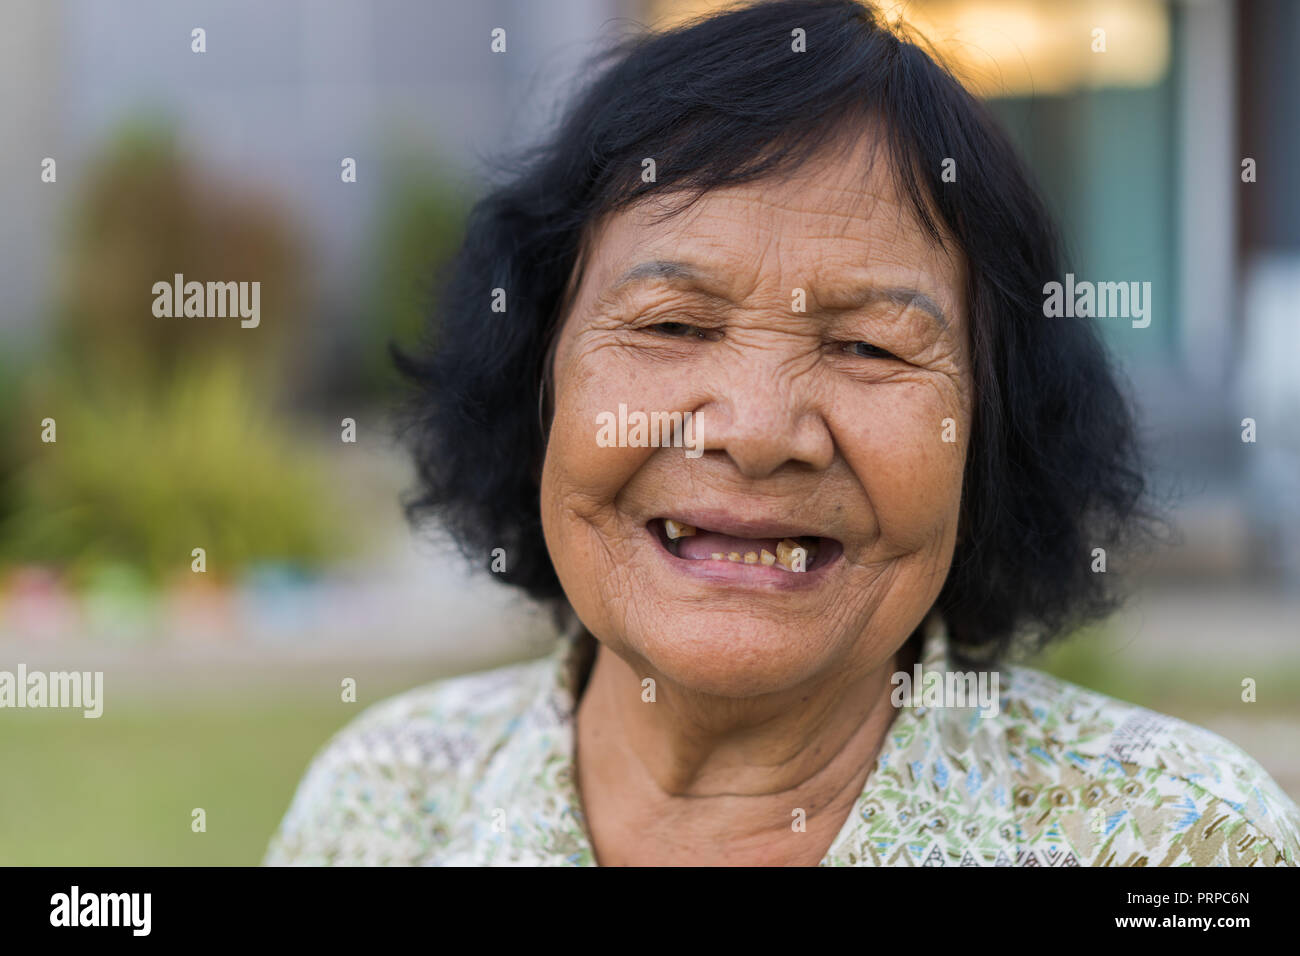 close up of senior woman laughing Stock Photo